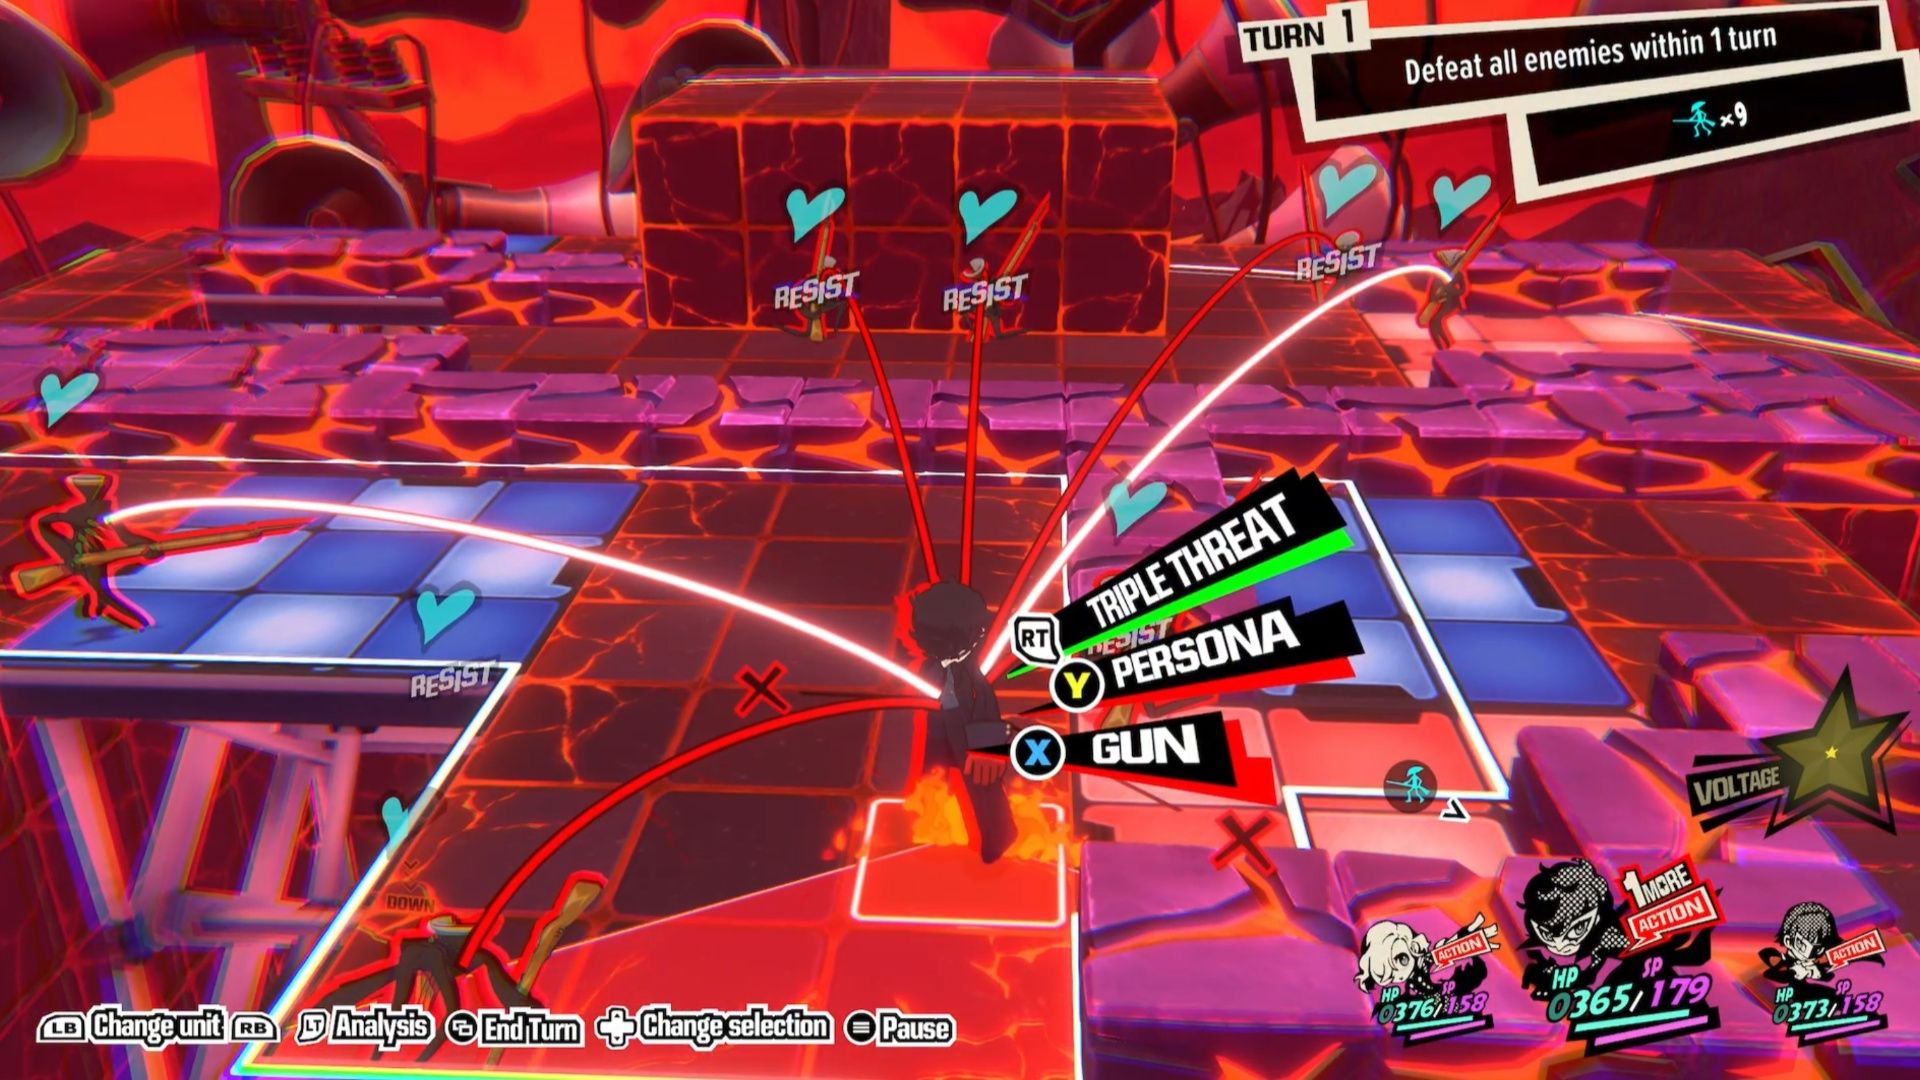 Joker makes his way through the level and finds a spot to shoot an enemy during Quest 12 in Persona 5 Tactica.